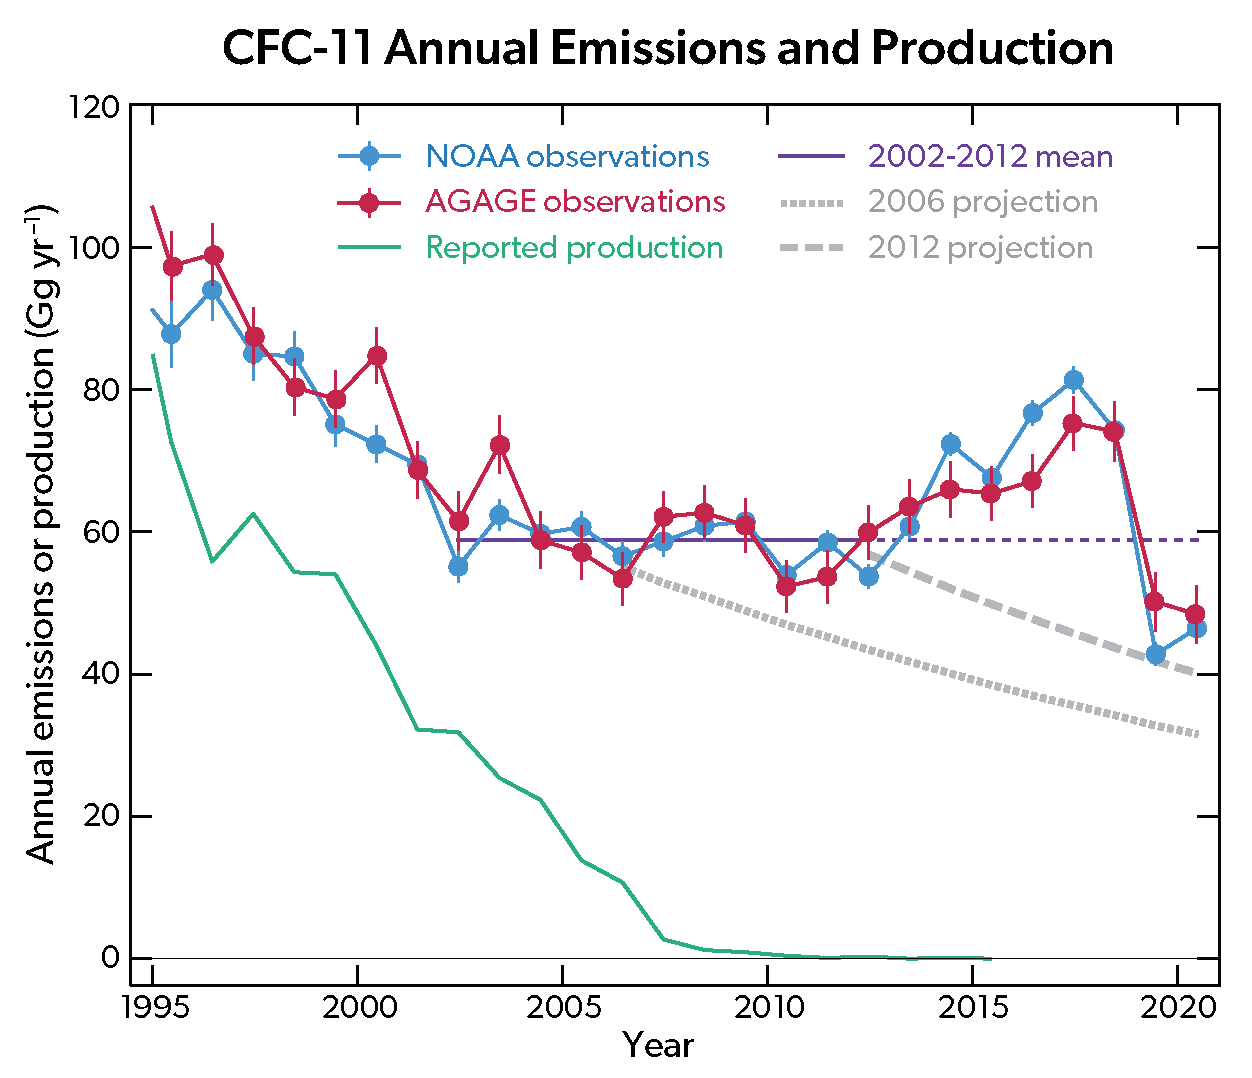 CFC-11 Annual Emissions and Production